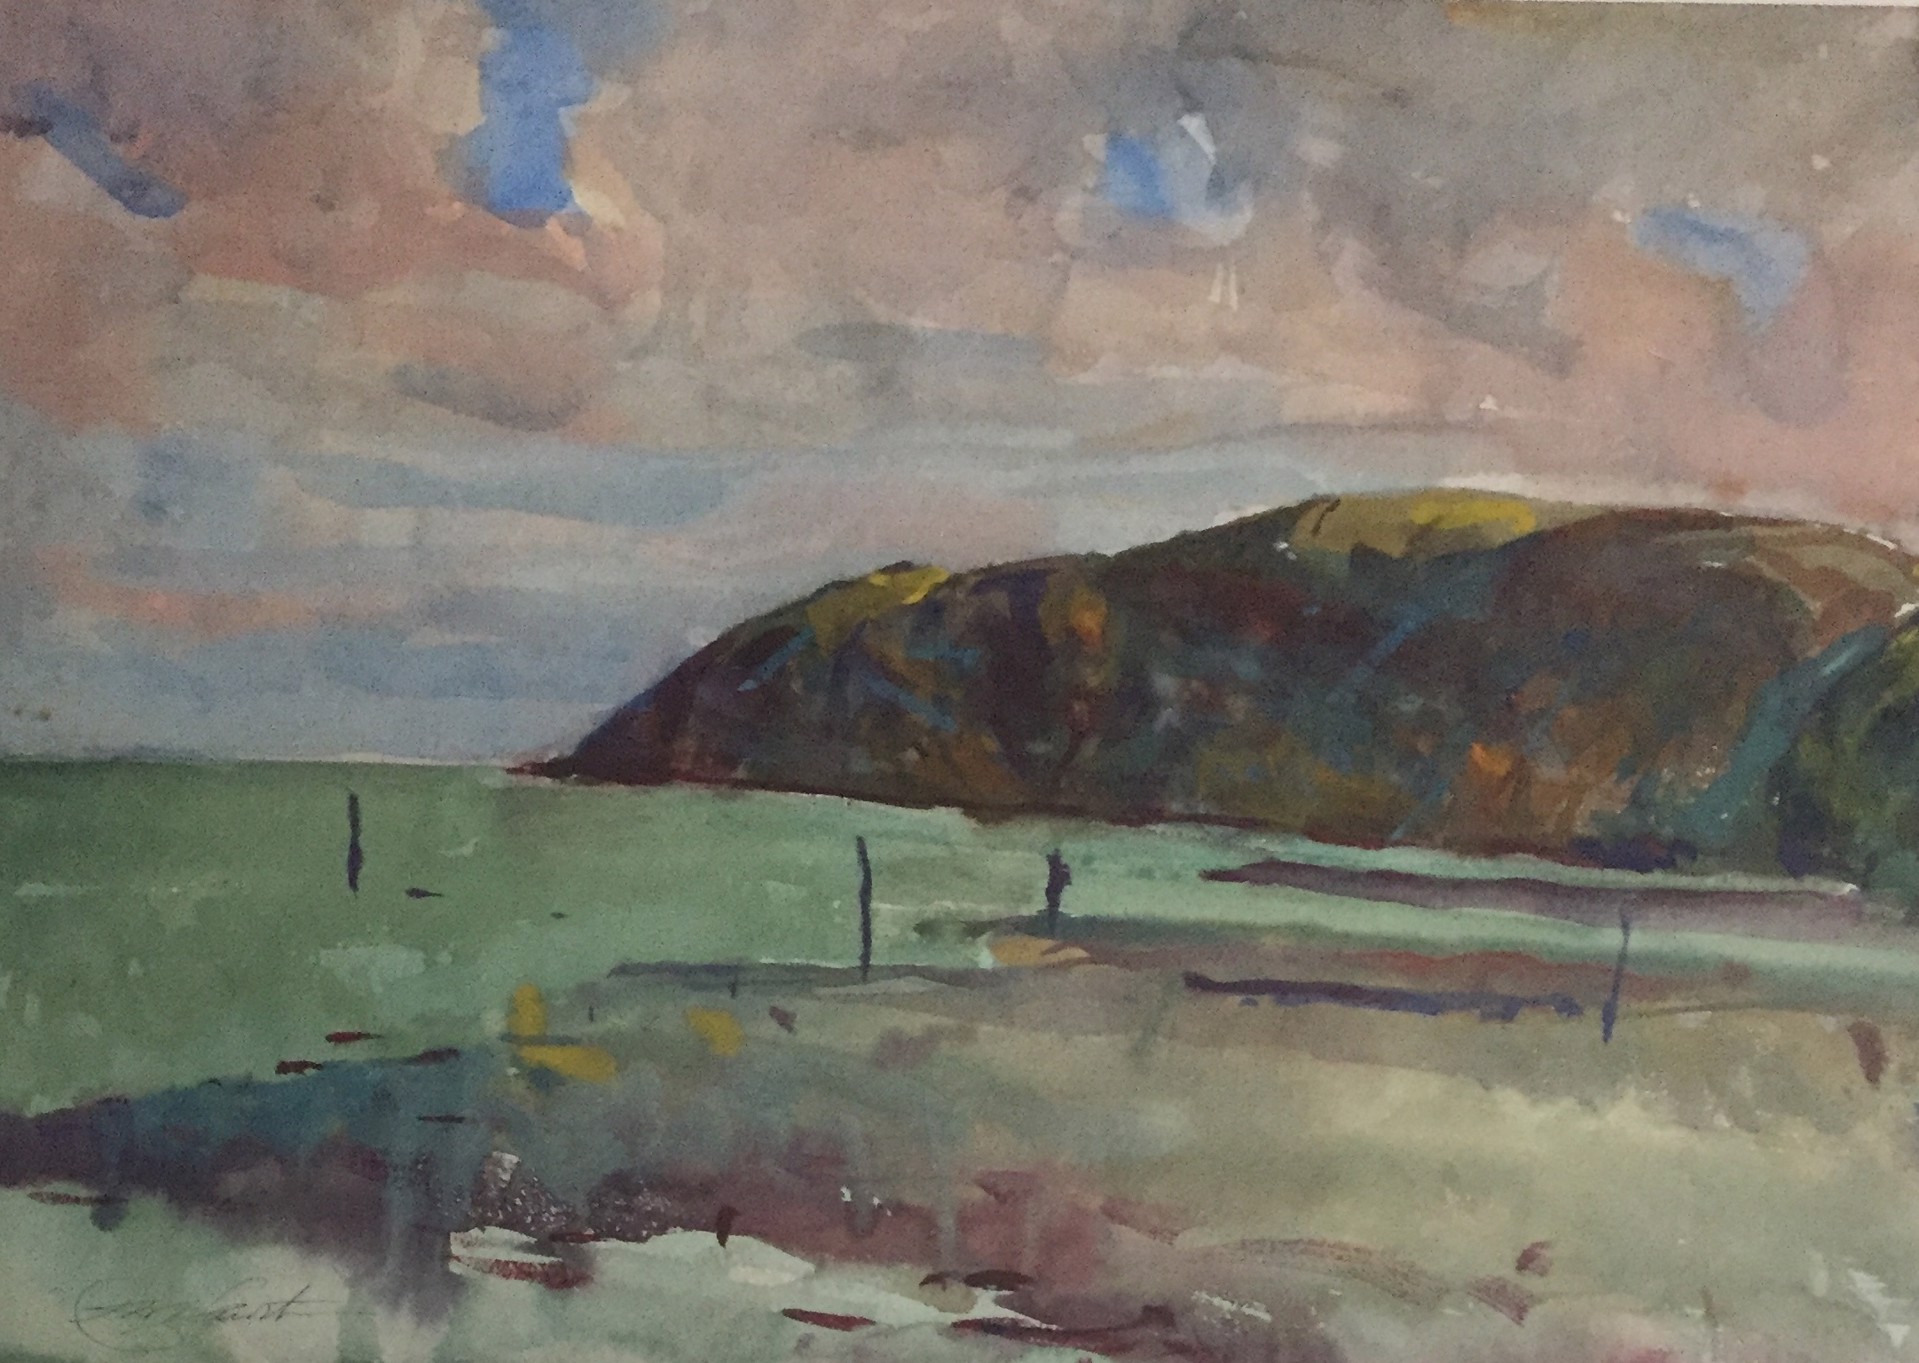 Lynmouth Cliffs No. 3 by Charles Webster Hawthorne